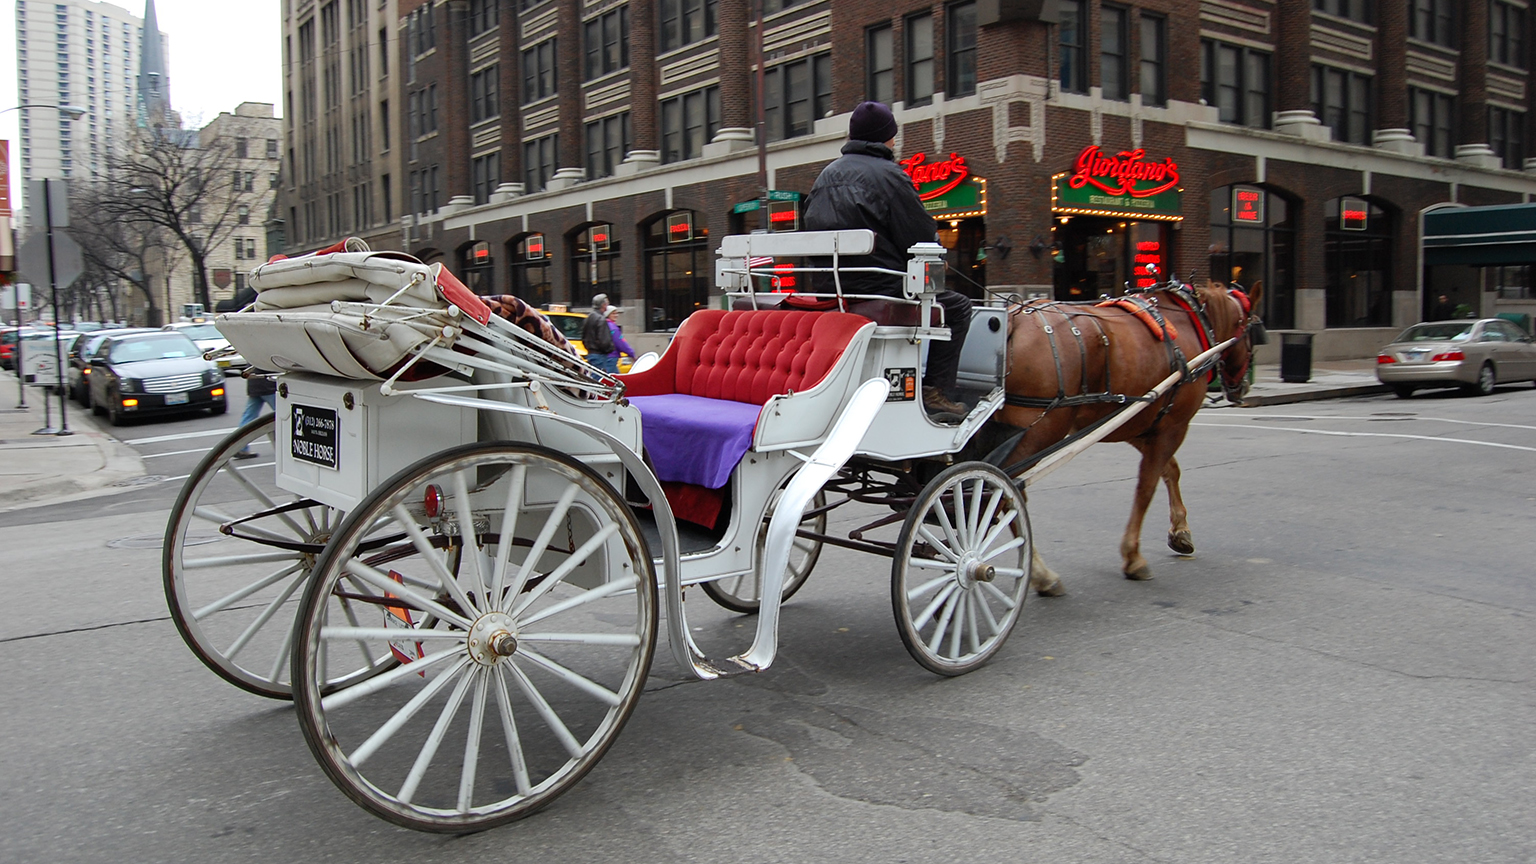 City Council Unanimously Bans Horse-Drawn Carriages Starting Jan